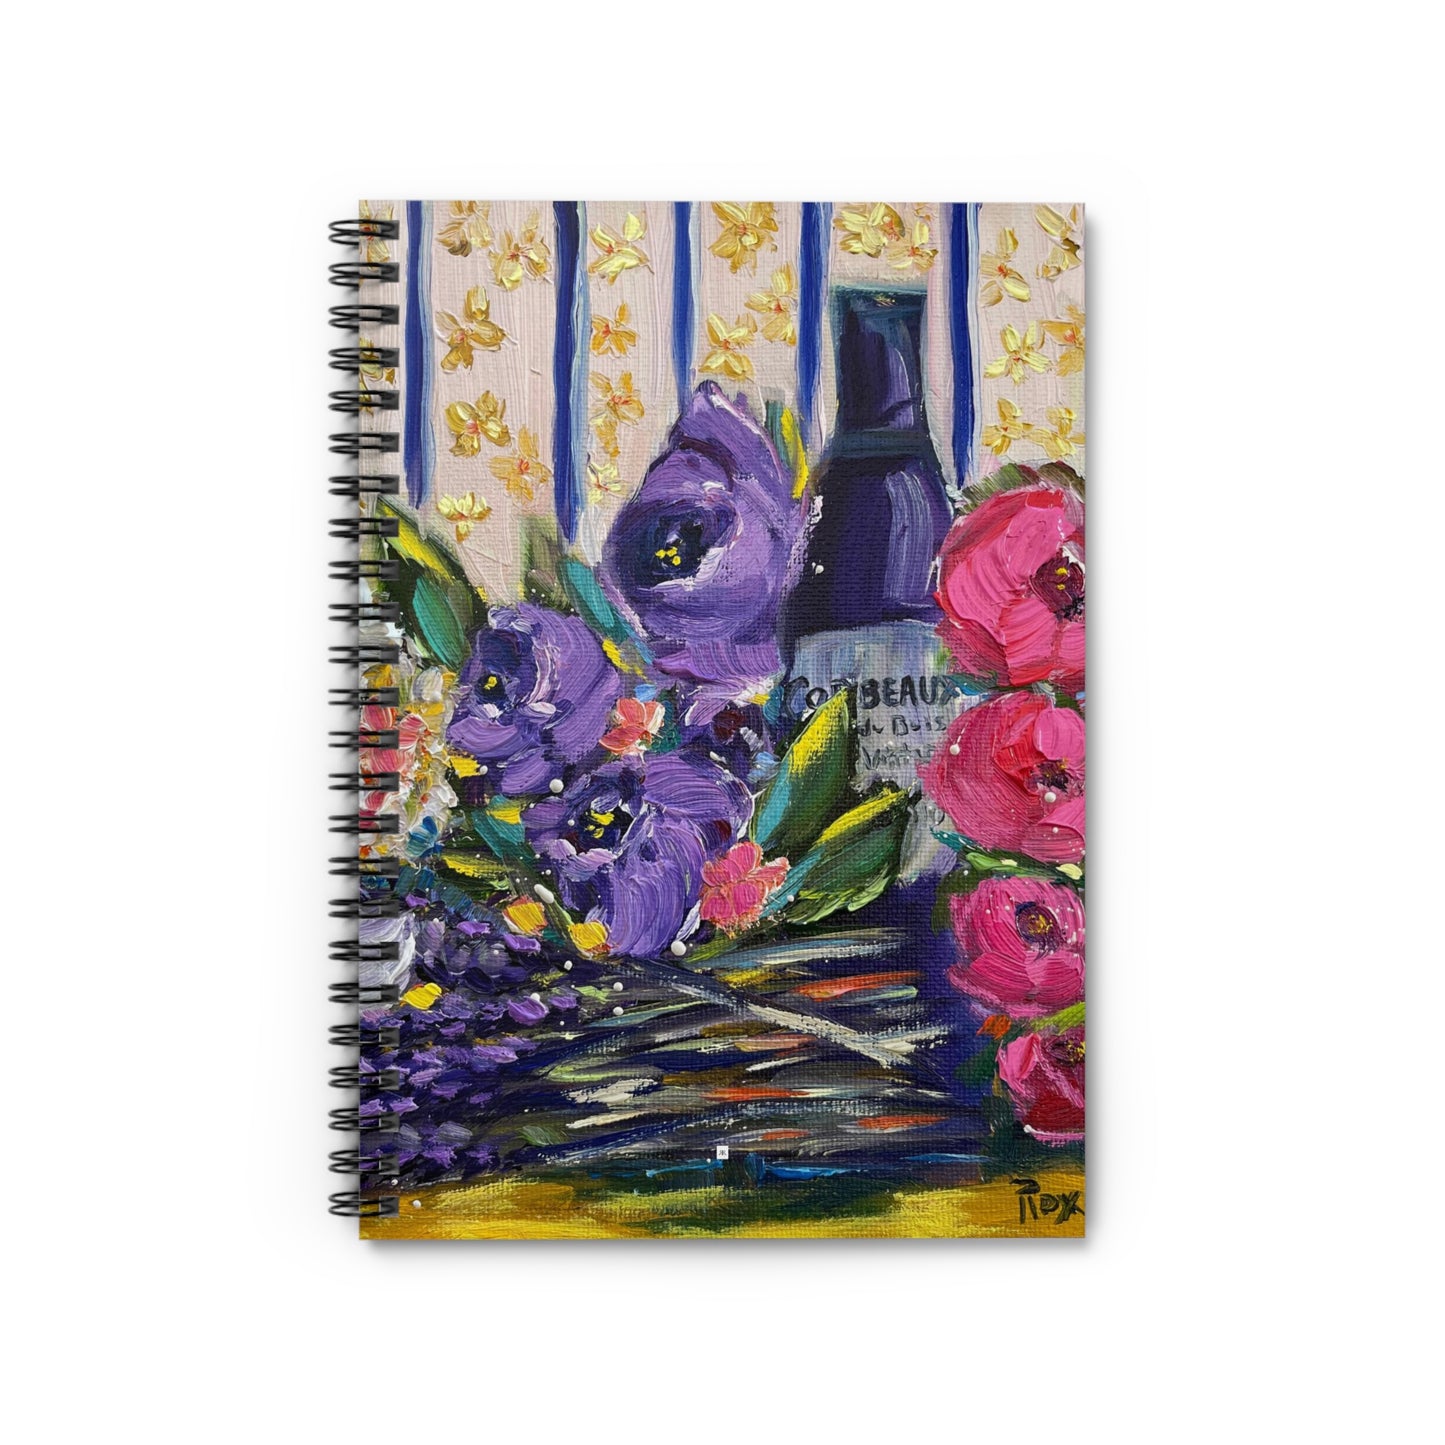 Corbeaux Wine and Lavender- Spiral Notebook